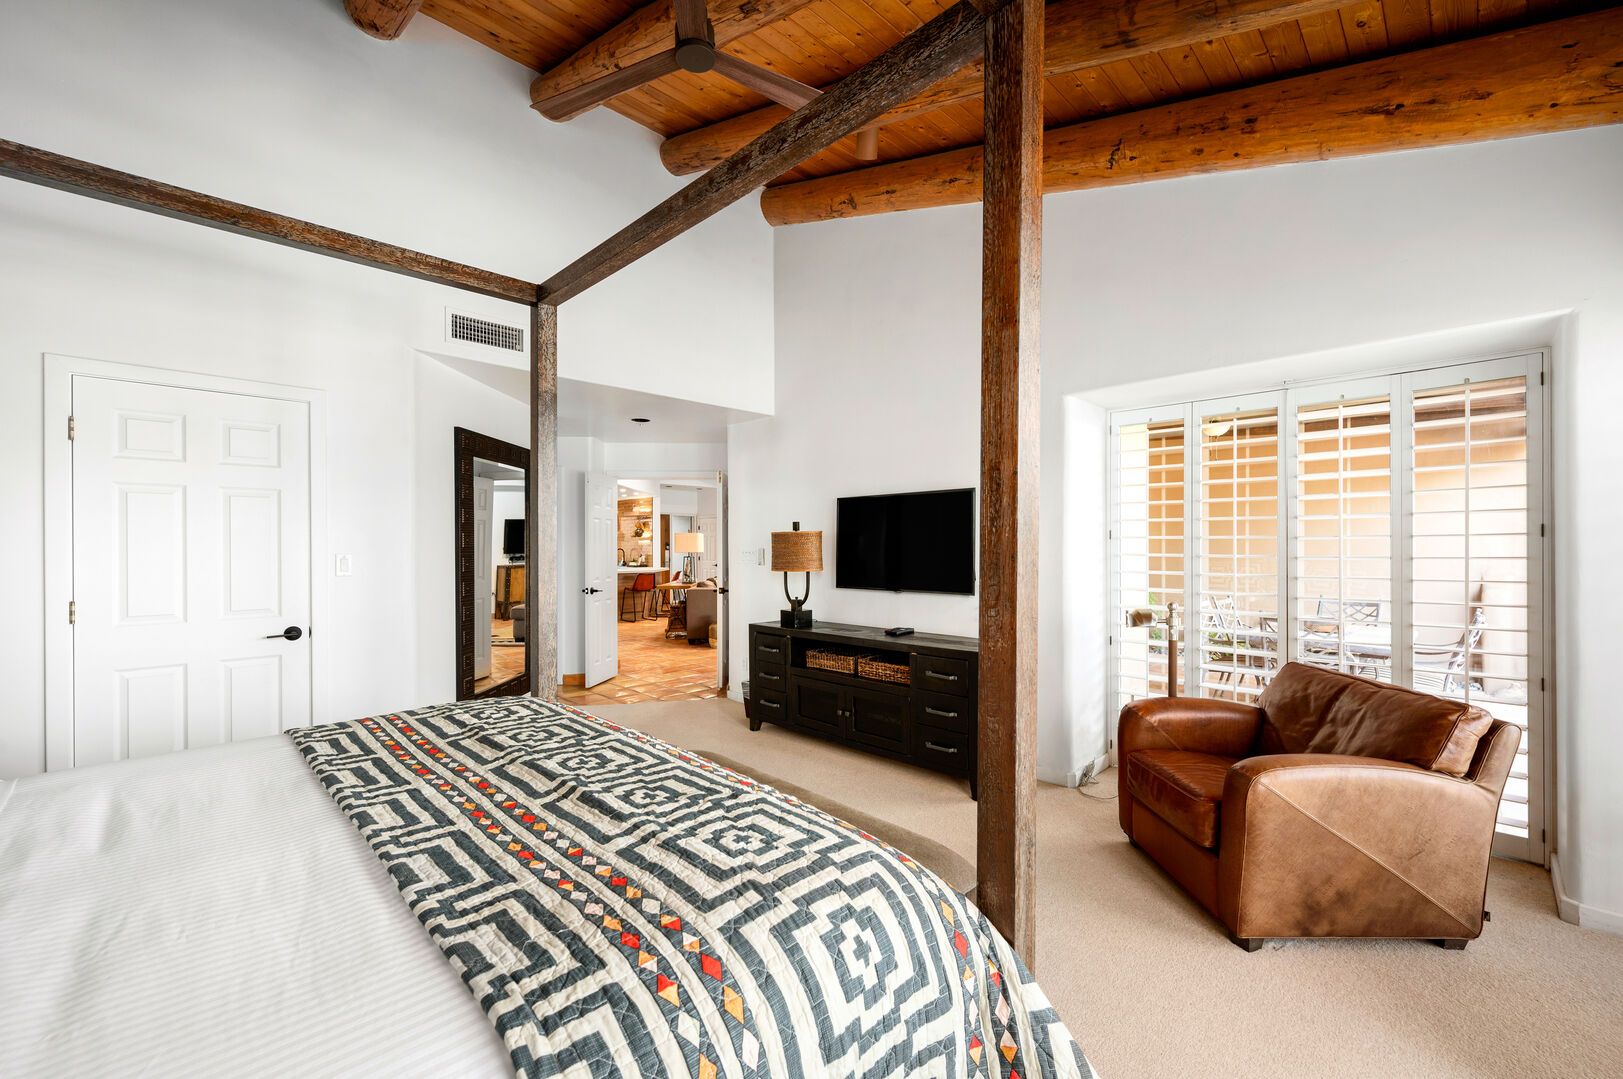 The master bedroom has a beautiful four-post bed and seating area.